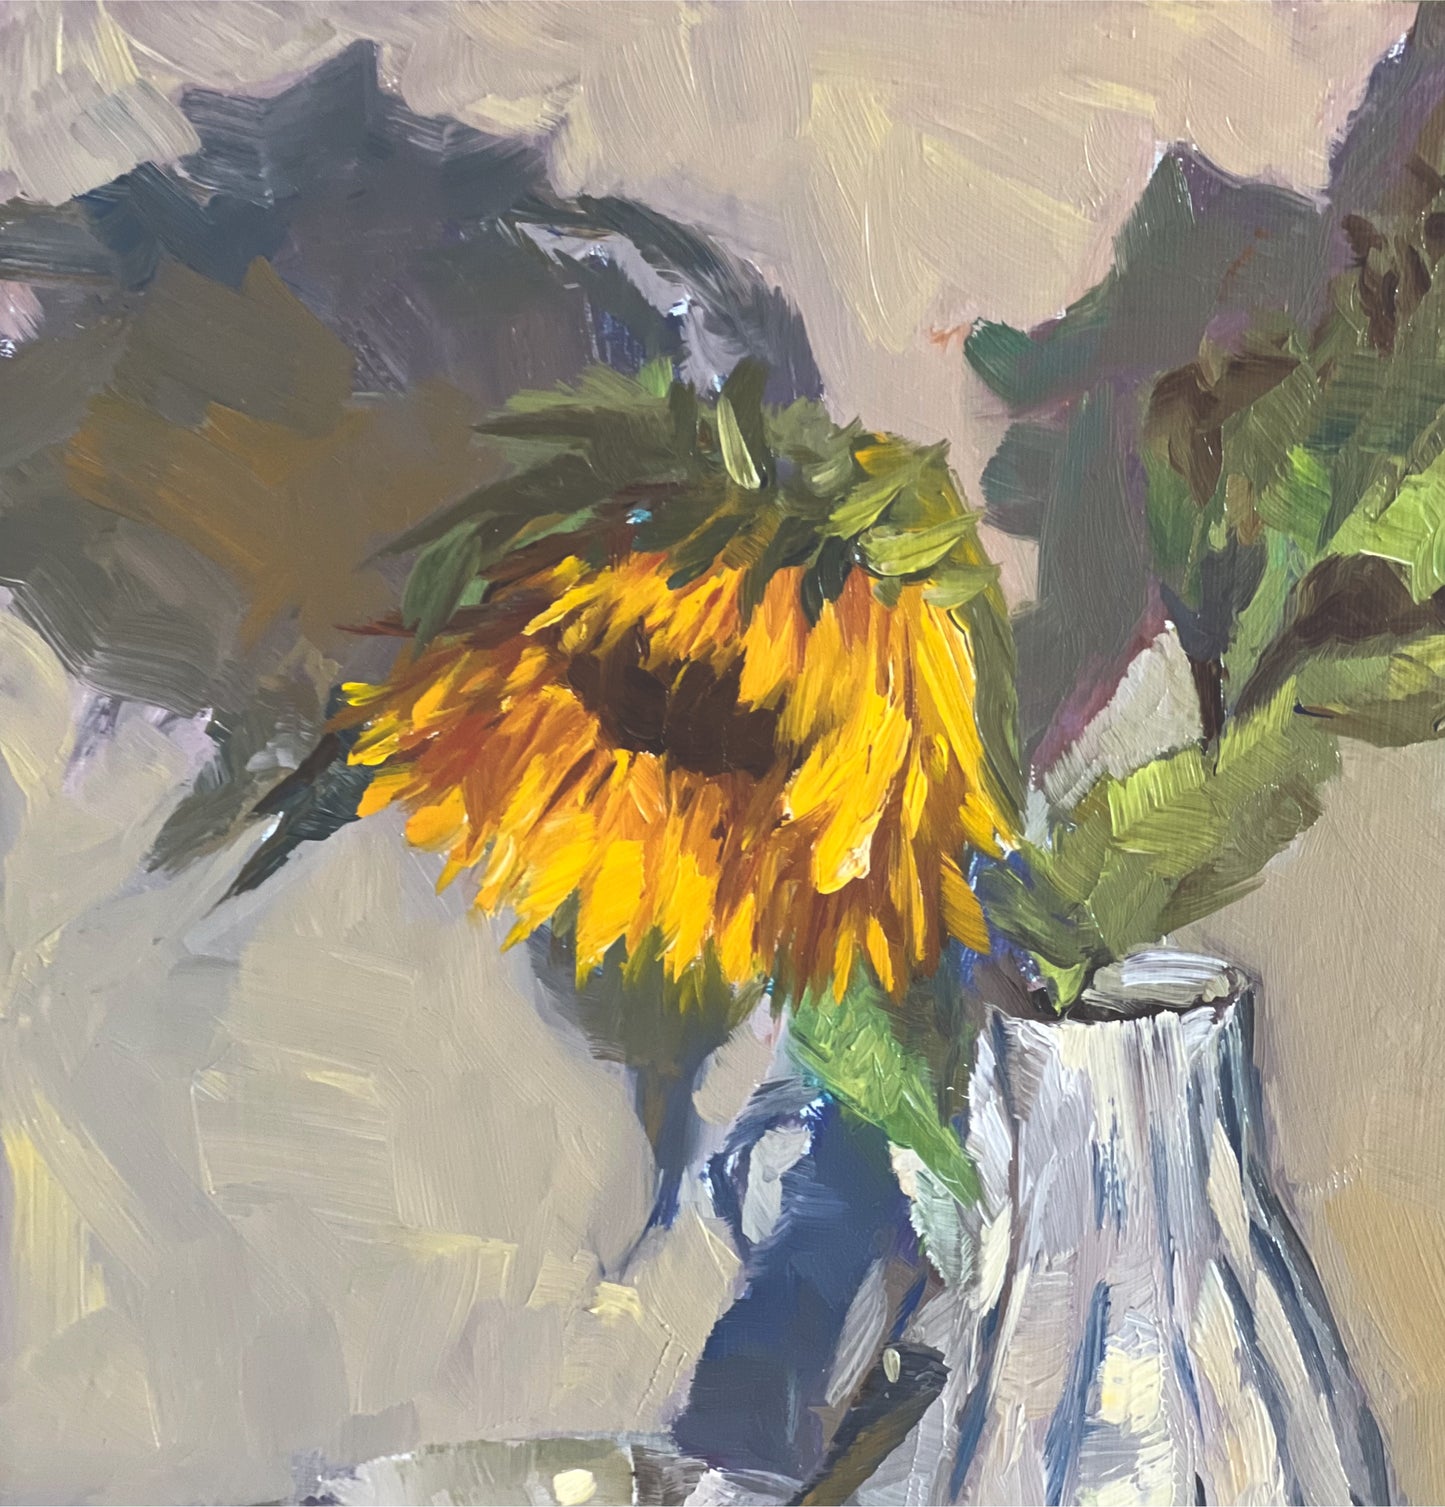 Sunflower Series 5 - Original Stilllife Painting, 8 by 12 inches